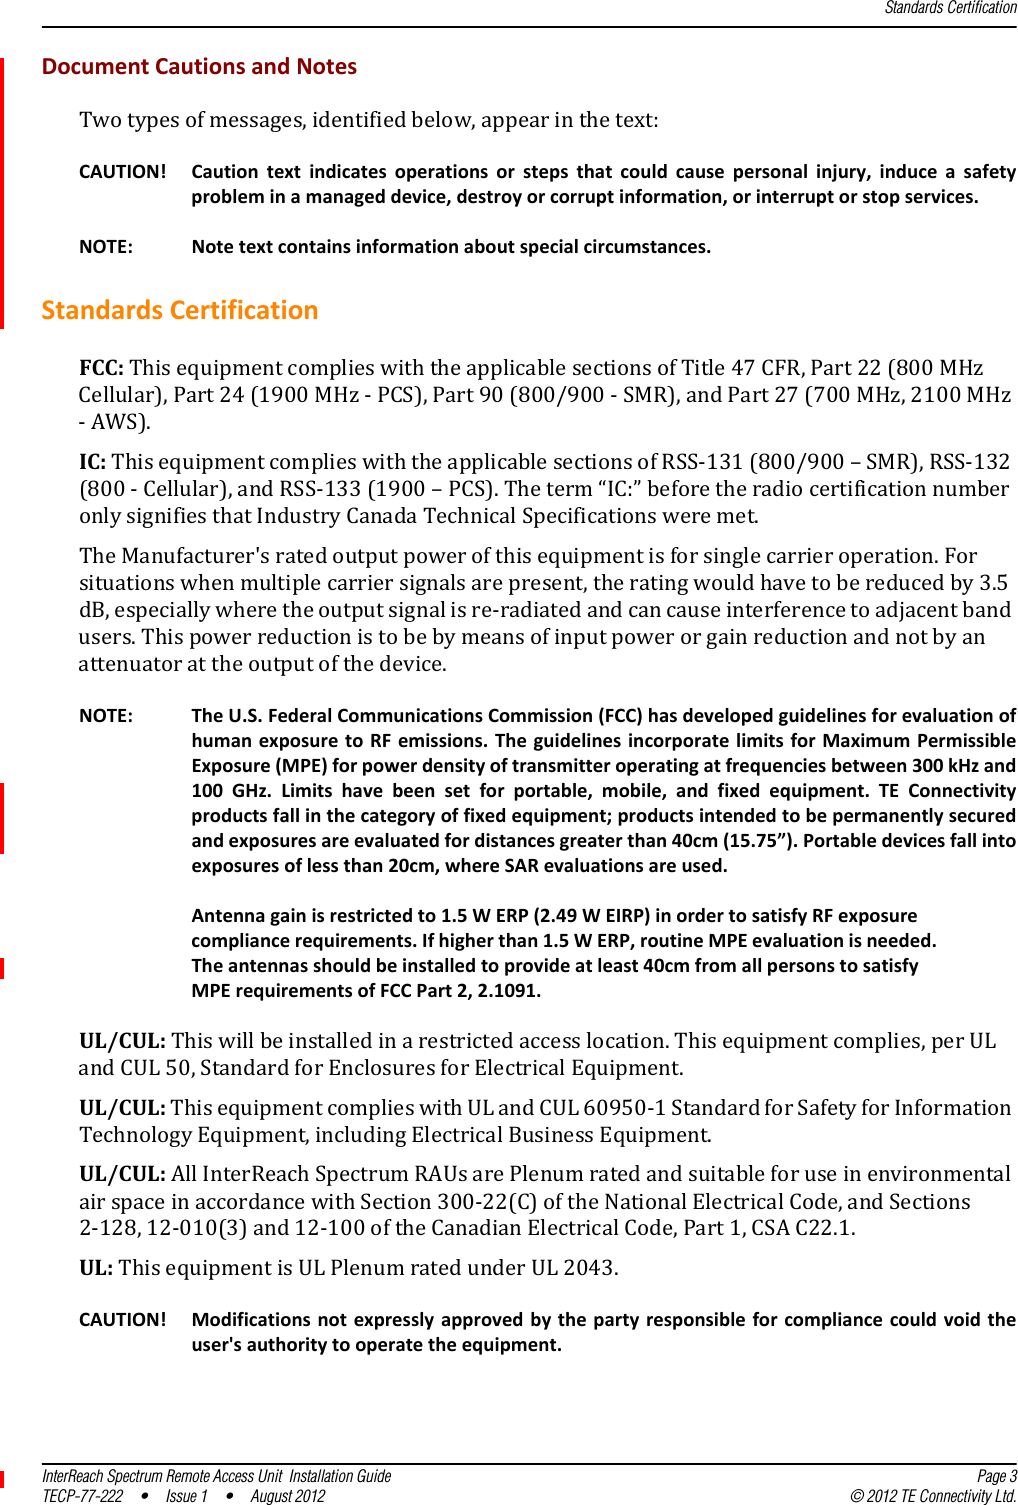 Standards CertificationInterReach Spectrum Remote Access Unit  Installation Guide Page 3TECP-77-222 • Issue 1 • August 2012 © 2012 TE Connectivity Ltd.DocumentCautionsandNotesTwotypesofmessages,identifiedbelow,appearinthetext:CAUTION! Cautiontextindicatesoperationsorstepsthatcouldcausepersonalinjury,induceasafetyprobleminamanageddevice,destroyorcorruptinformation,orinterruptorstopservices.NOTE: Notetextcontainsinformationaboutspecialcircumstances.StandardsCertificationFCC:ThisequipmentcomplieswiththeapplicablesectionsofTitle47CFR,Part22(800MHzCellular),Part24(1900MHz‐PCS),Part90(800/900‐SMR),andPart27(700MHz,2100MHz‐AWS).IC:ThisequipmentcomplieswiththeapplicablesectionsofRSS‐131(800/900–SMR),RSS‐132(800‐Cellular),andRSS‐133(1900–PCS).Theterm“IC:”beforetheradiocertificationnumberonlysignifiesthatIndustryCanadaTechnicalSpecificationsweremet.TheManufacturer&apos;sratedoutputpowerofthisequipmentisforsinglecarrieroperation.Forsituationswhenmultiplecarriersignalsarepresent,theratingwouldhavetobereducedby3.5dB,especiallywheretheoutputsignalisre‐radiatedandcancauseinterferencetoadjacentbandusers.Thispowerreductionistobebymeansofinputpowerorgainreductionandnotbyanattenuatorattheoutputofthedevice.NOTE: TheU.S.FederalCommunicationsCommission(FCC)hasdevelopedguidelinesforevaluationofhumanexposuretoRFemissions.TheguidelinesincorporatelimitsforMaximumPermissibleExposure(MPE)forpowerdensityoftransmitteroperatingatfrequenciesbetween300kHzand100GHz.Limitshavebeensetforportable,mobile,andfixedequipment.TEConnectivityproductsfallinthecategoryoffixedequipment;productsintendedtobepermanentlysecuredandexposuresareevaluatedfordistancesgreaterthan40cm(15.75”).Portabledevicesfallintoexposuresoflessthan20cm,whereSARevaluationsareused.Antennagainisrestrictedto1.5WERP(2.49WEIRP)inordertosatisfyRFexposurecompliancerequirements.Ifhigherthan1.5WERP,routineMPEevaluationisneeded.Theantennasshouldbeinstalledtoprovideatleast40cmfromallpersonstosatisfyMPErequirementsofFCCPart2,2.1091.UL/CUL:Thiswillbeinstalledinarestrictedaccesslocation.Thisequipmentcomplies,perULandCUL50,StandardforEnclosuresforElectricalEquipment.UL/CUL:ThisequipmentcomplieswithULandCUL60950‐1StandardforSafetyforInformationTechnologyEquipment,includingElectricalBusinessEquipment.UL/CUL:AllInterReachSpectrumRAUsarePlenumratedandsuitableforuseinenvironmentalairspaceinaccordancewithSection300‐22(C)oftheNationalElectricalCode,andSections2‐128,12‐010(3)and12‐100oftheCanadianElectricalCode,Part1,CSAC22.1.UL:ThisequipmentisULPlenumratedunderUL2043.CAUTION! Modificationsnotexpresslyapprovedbythepartyresponsibleforcompliancecouldvoidtheuser&apos;sauthoritytooperatetheequipment.